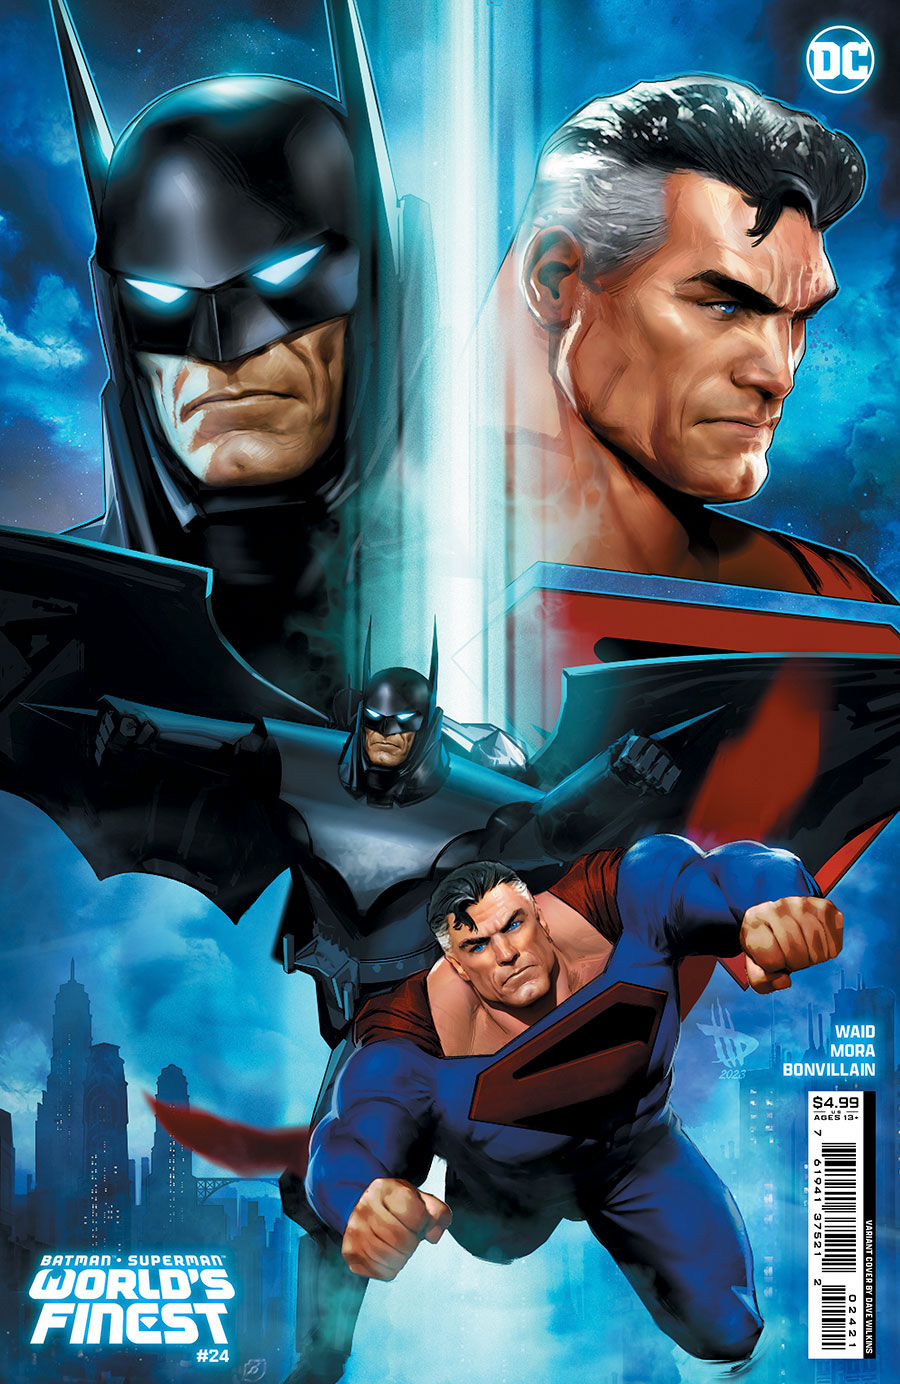 Batman Superman Worlds Finest #24 Cover B Variant Dave Wilkins Card Stock Cover